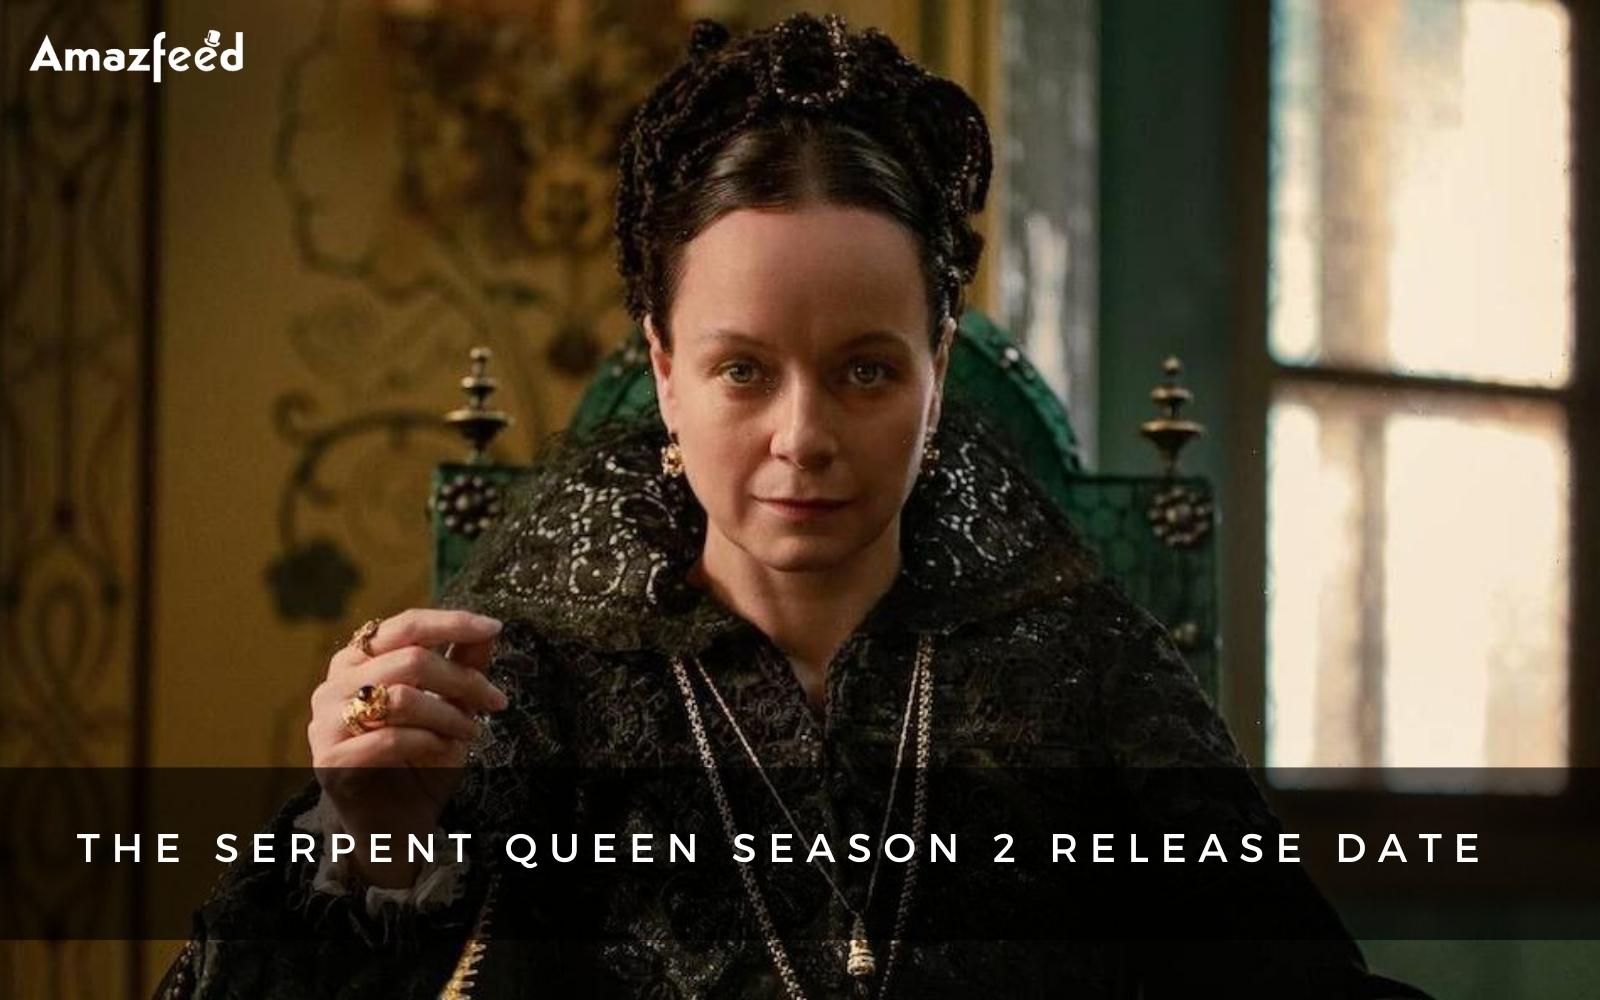 The Serpent Queen Season 2 Release Date will it ever happen, or will it